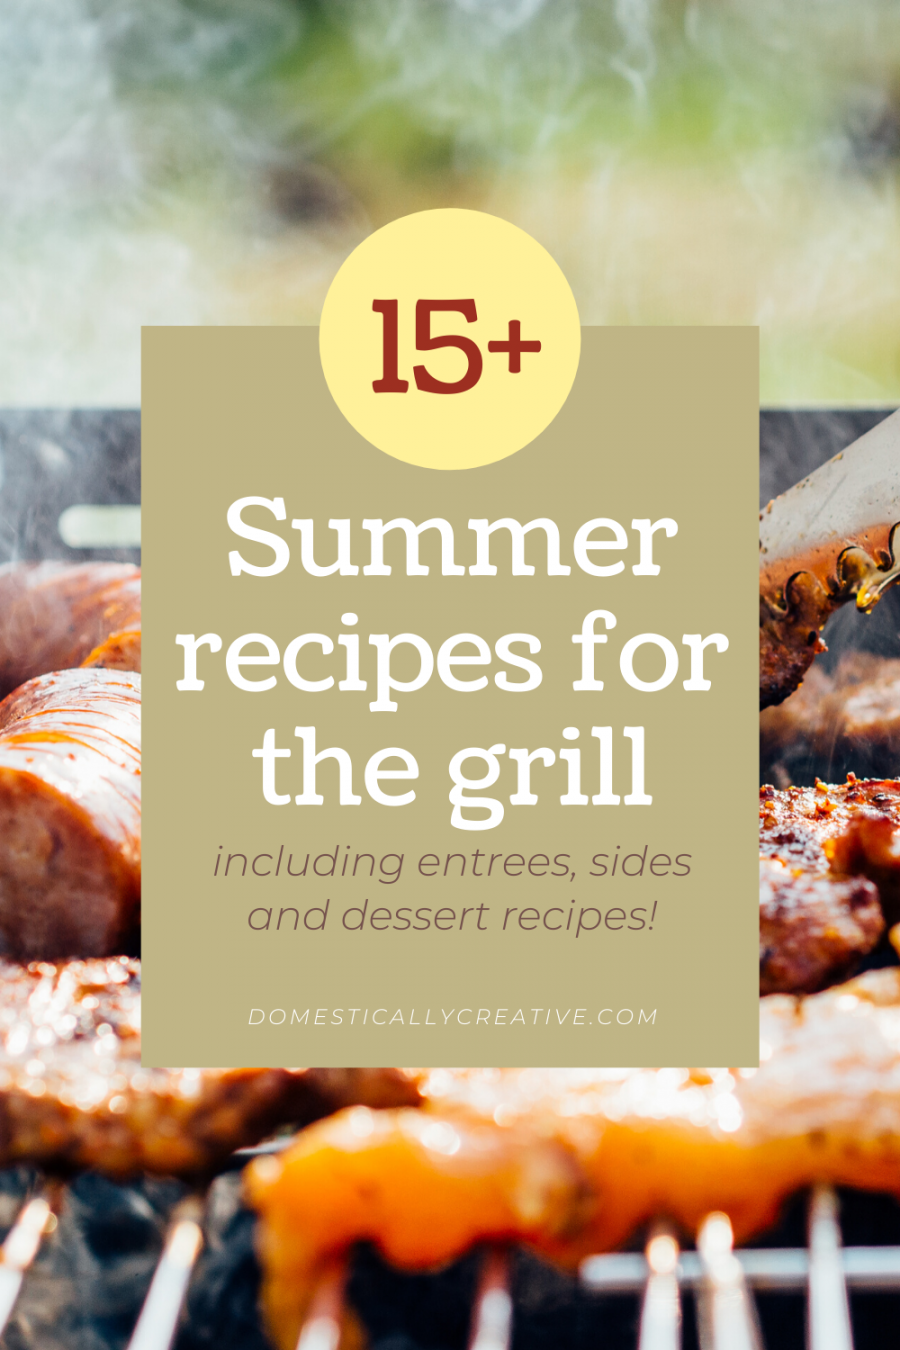 Summer recipes for the grill